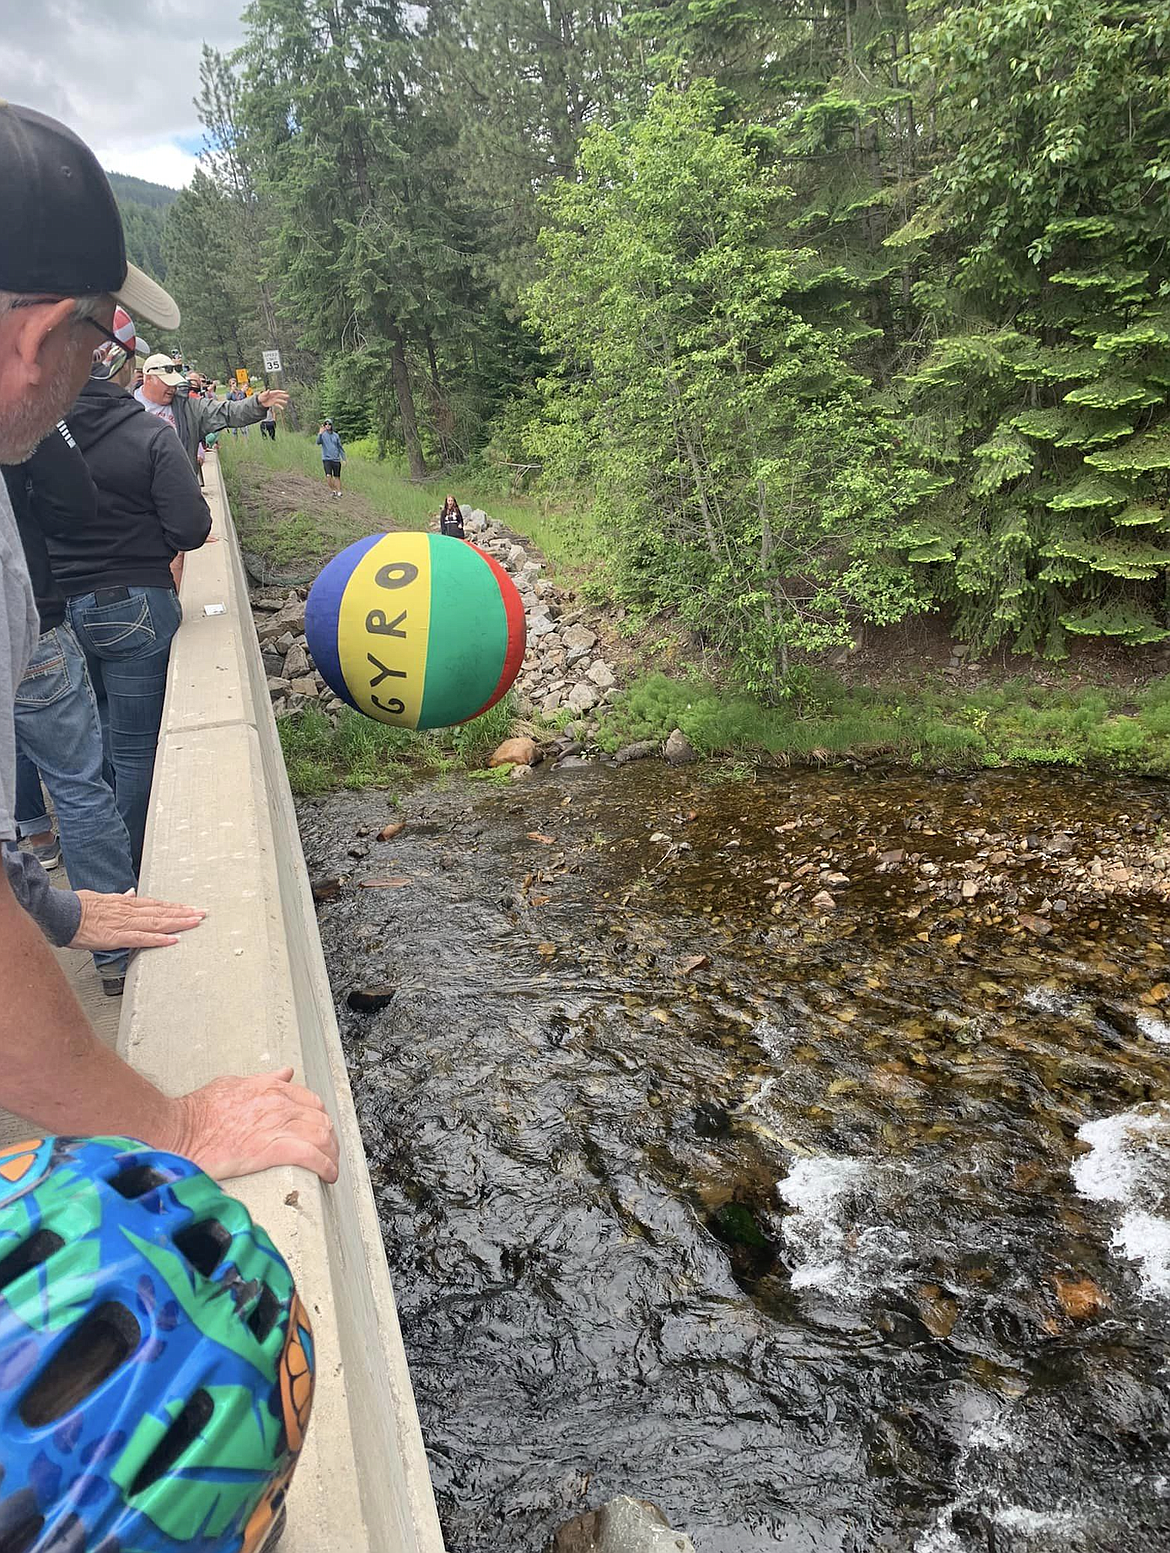 The Gyro Ball is dropped off of Mullan's Last Chance Bridge, officially kicking off the 81st running of the Lead Creek Derby.